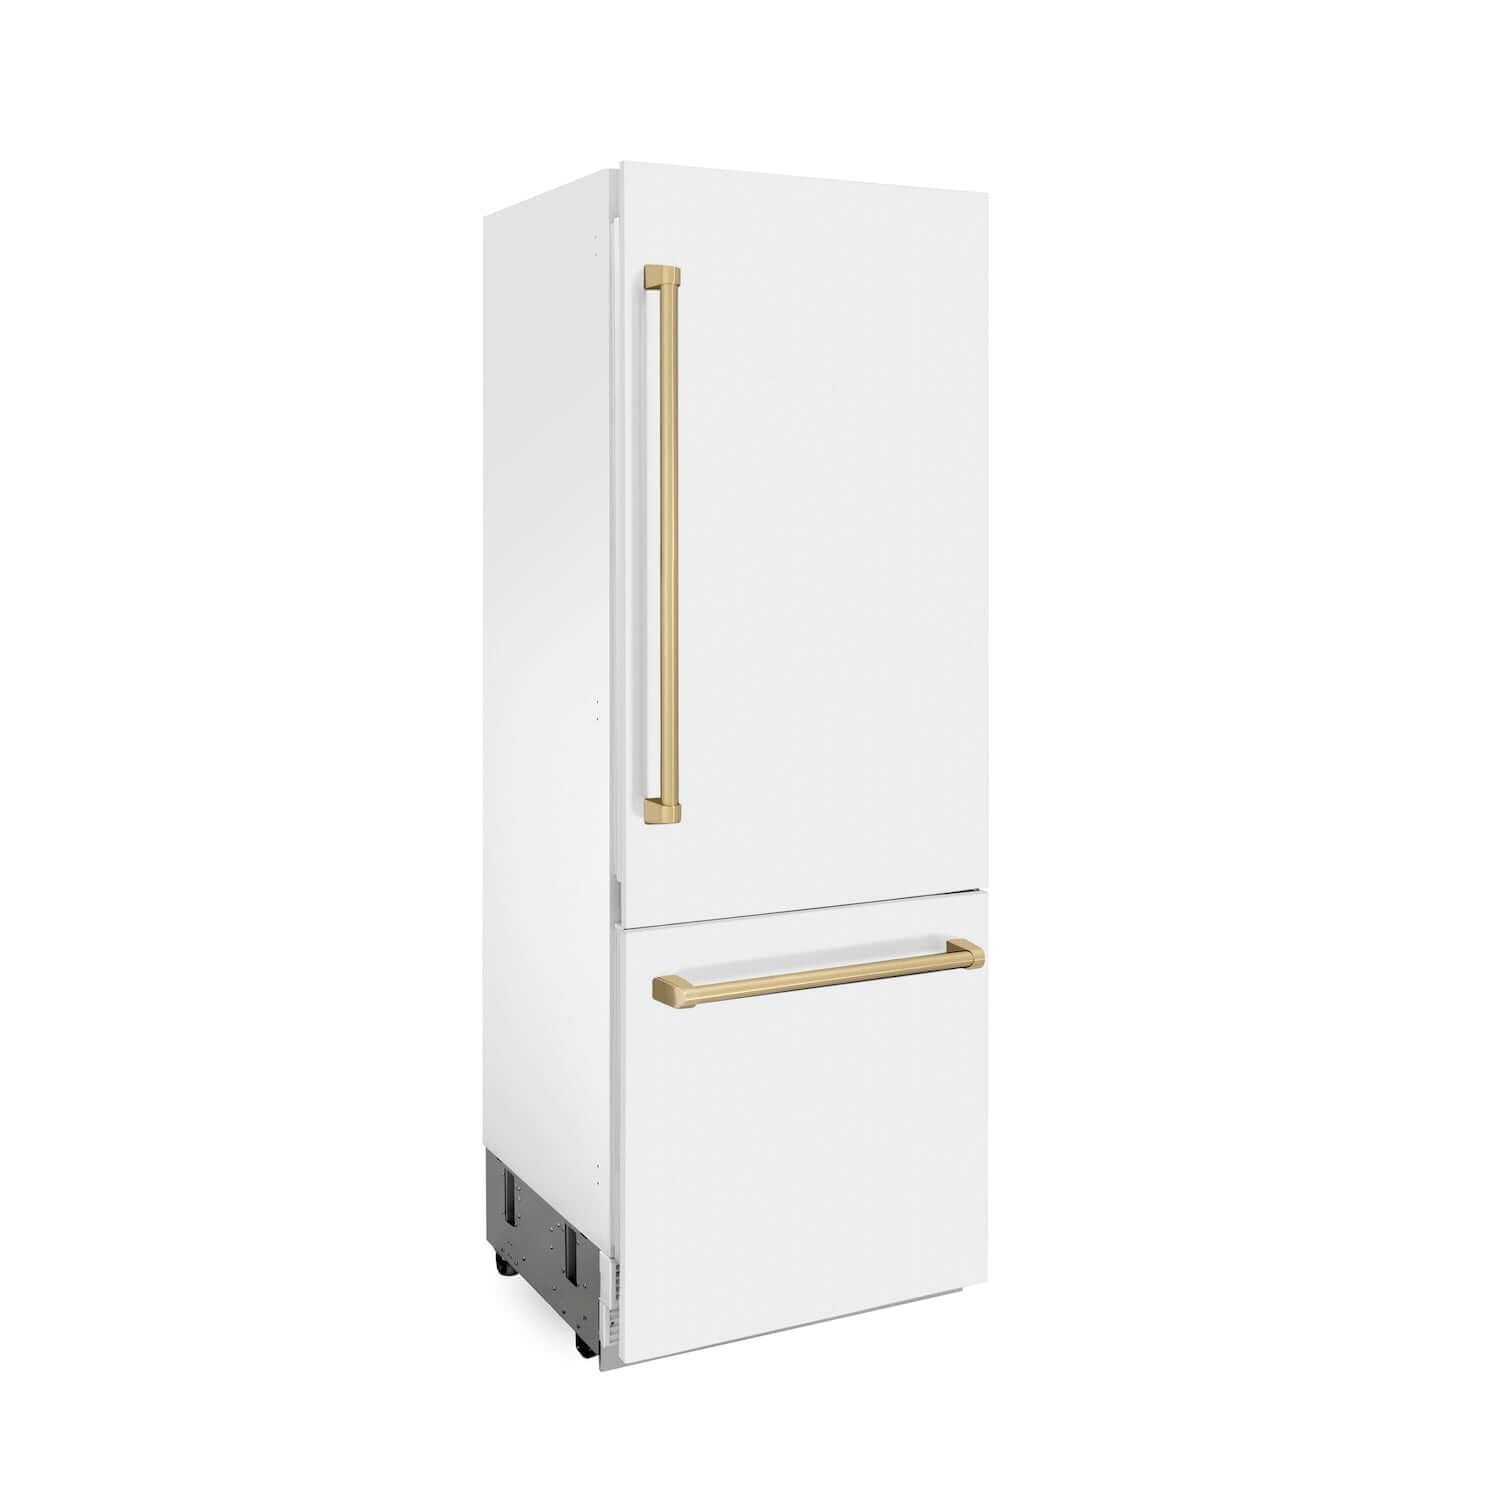 ZLINE 30" Autograph Edition 16.1 cu. ft. Built-in 2-Door Bottom Freezer Refrigerator with Internal Water and Ice Dispenser in White Matte with Champagne Bronze Accents (RBIVZ-WM-30-CB)